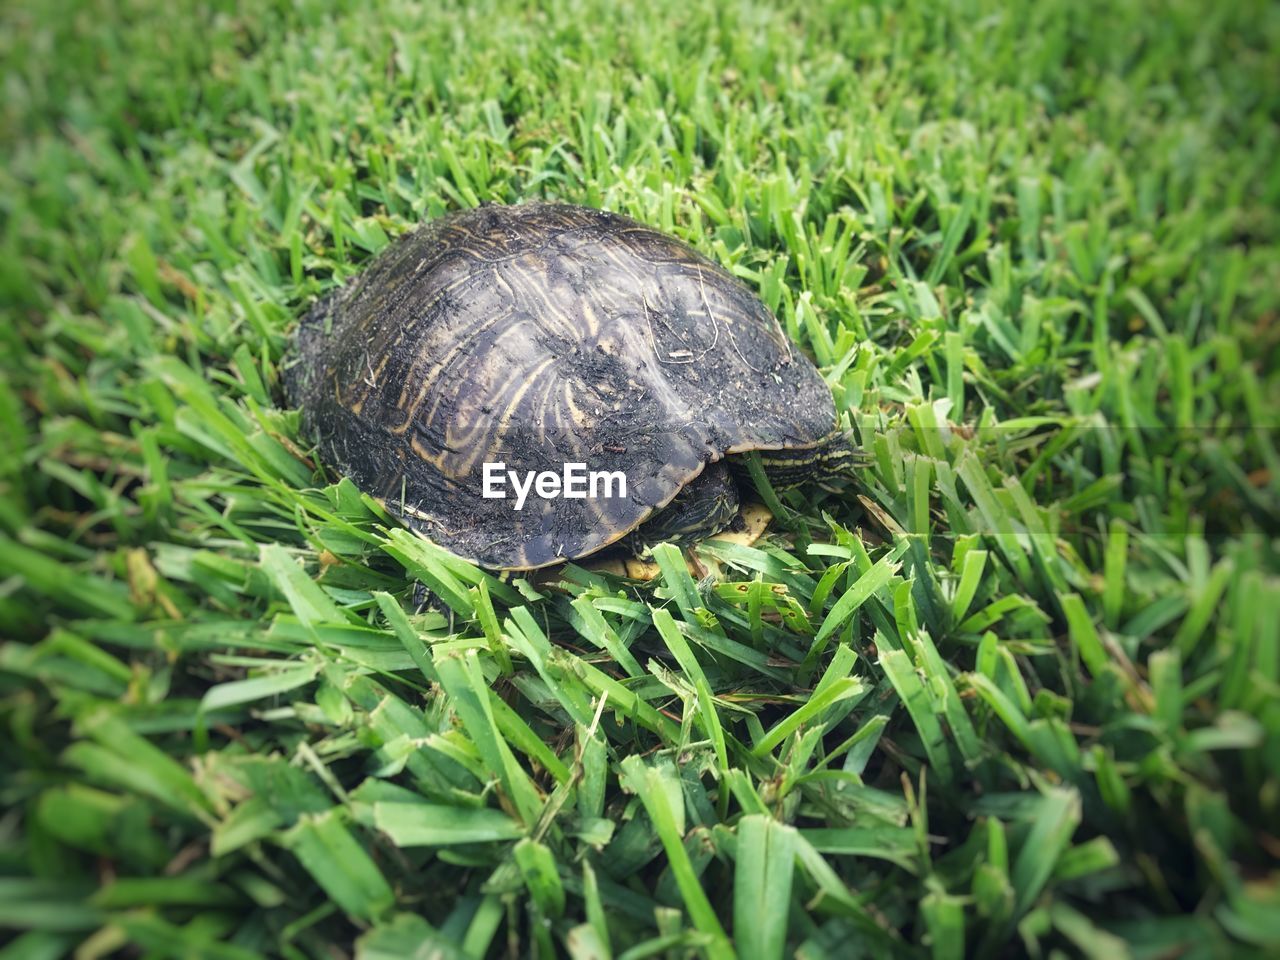 CLOSE-UP OF TURTLE IN GRASS